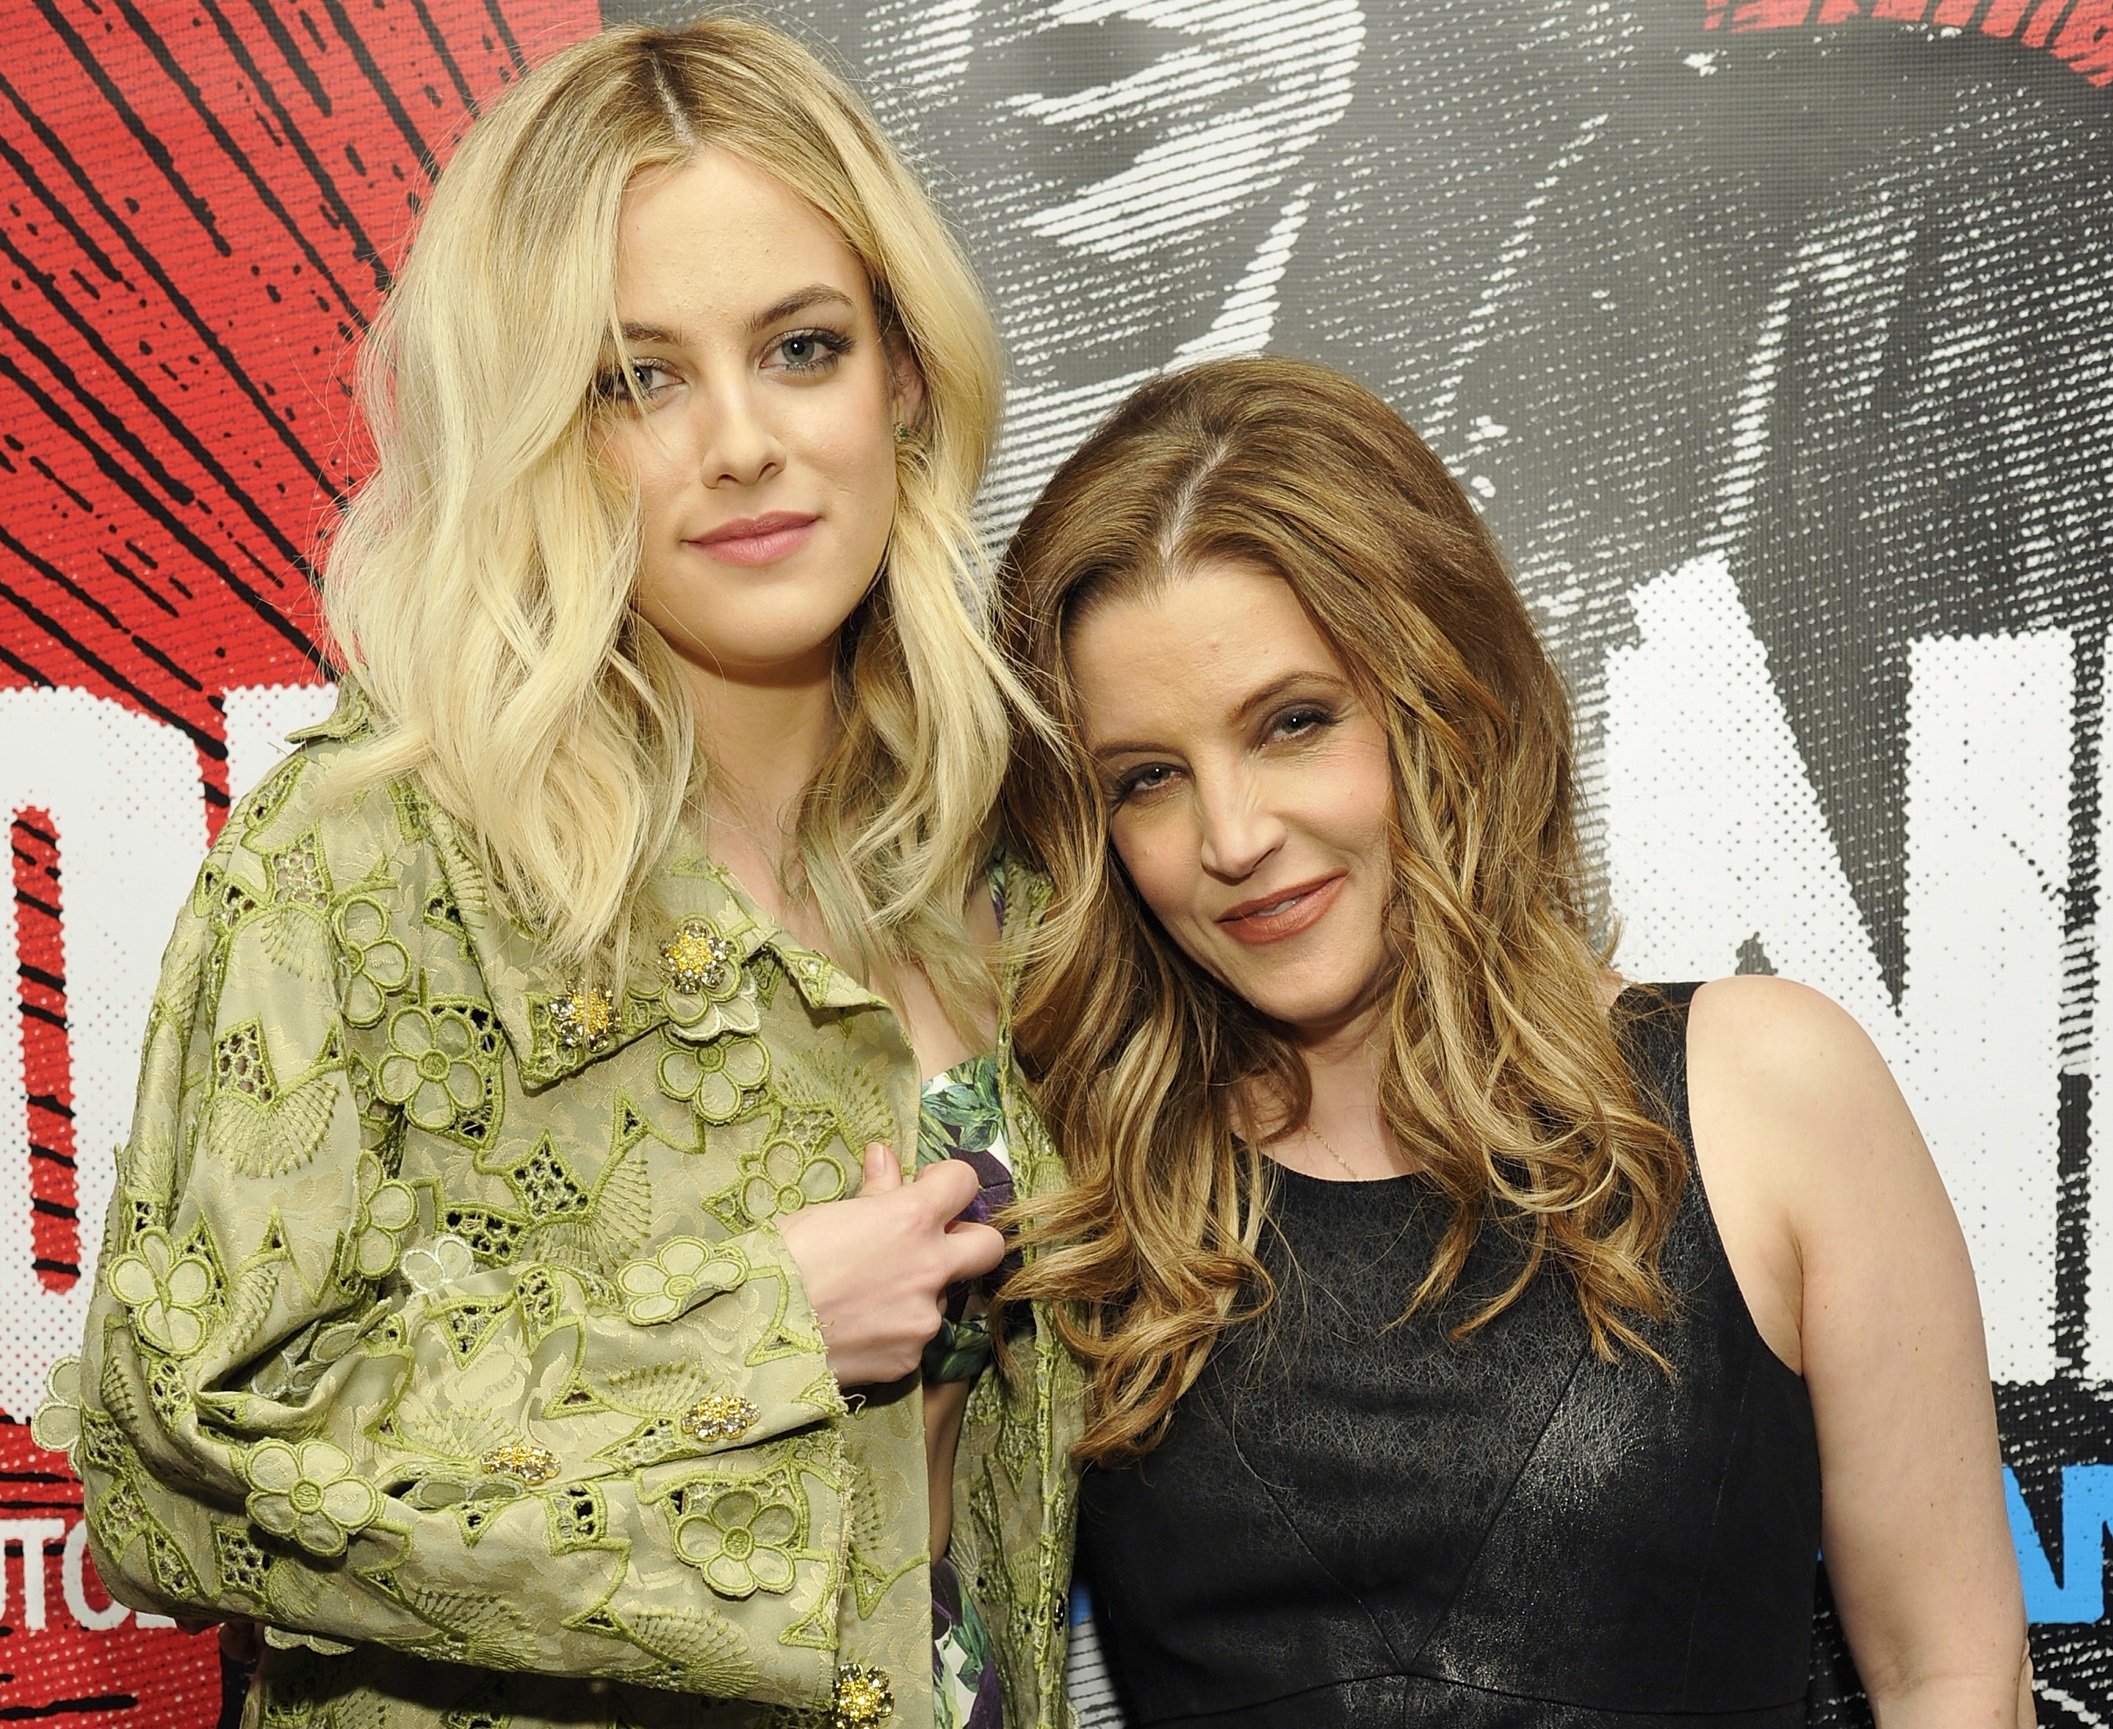 Riley Keough and Lisa Marie Presley on April 27, 2012 in West Hollywood, California.